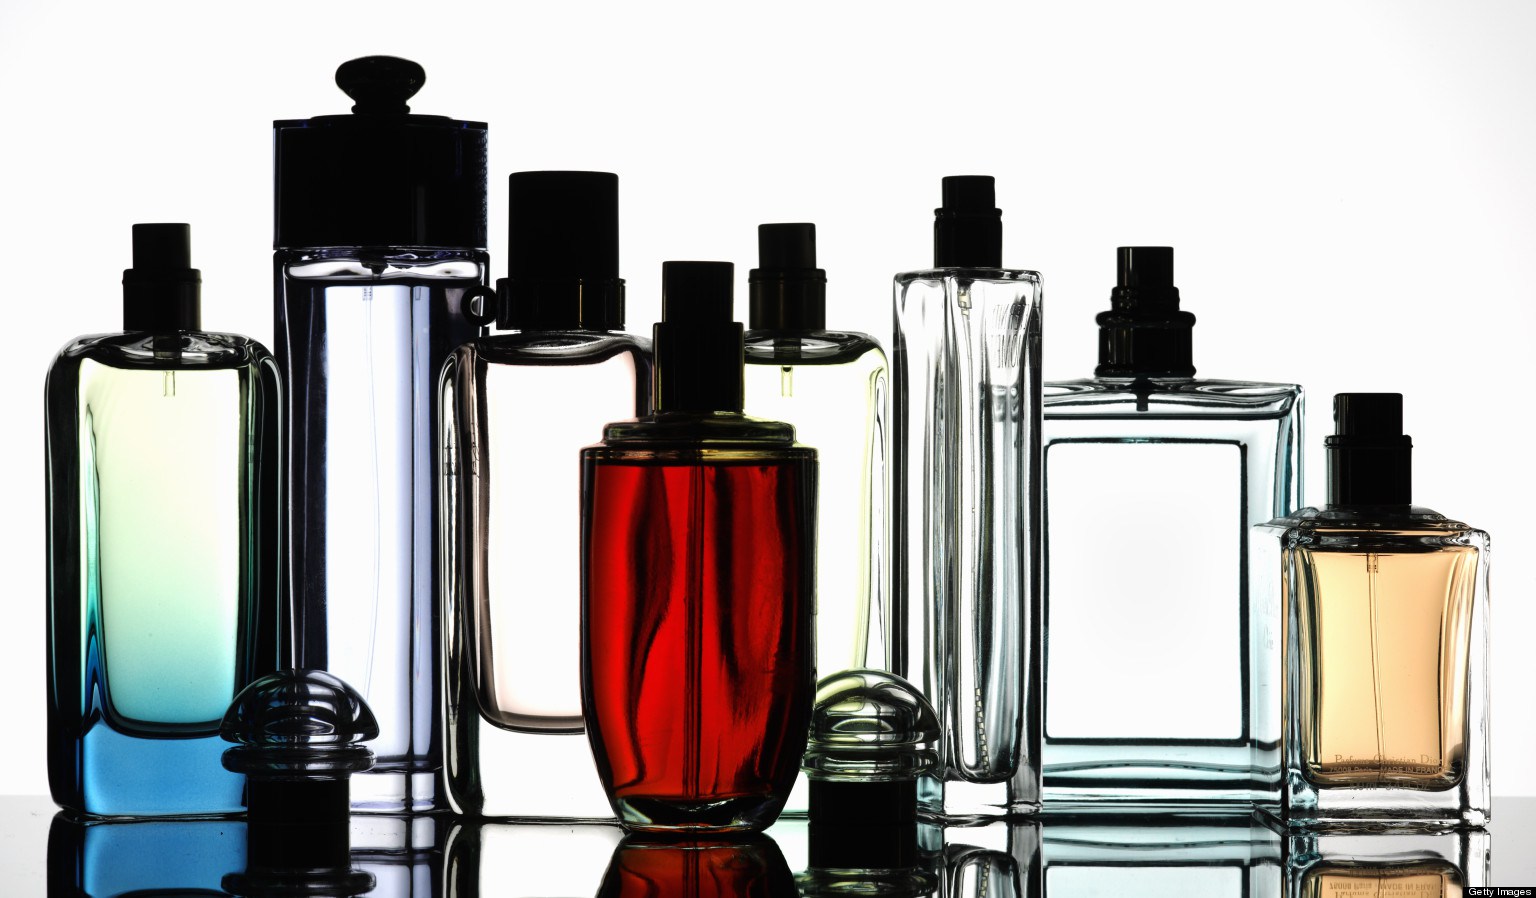 List Of The Best Perfume Shops In Dubai With Contact Details 